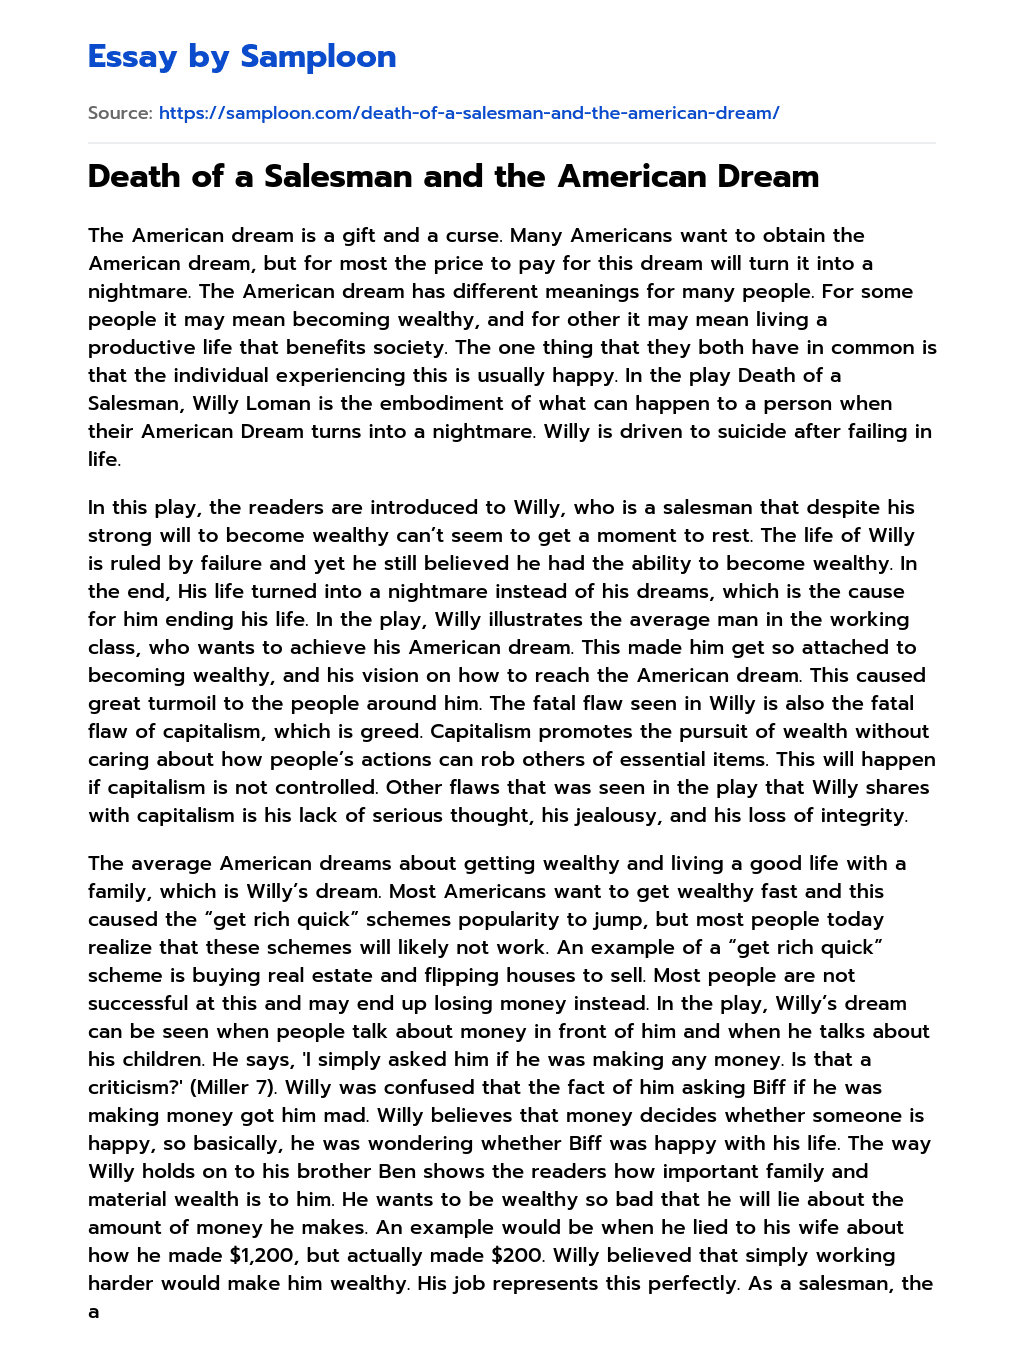 Death of a Salesman and the American Dream essay